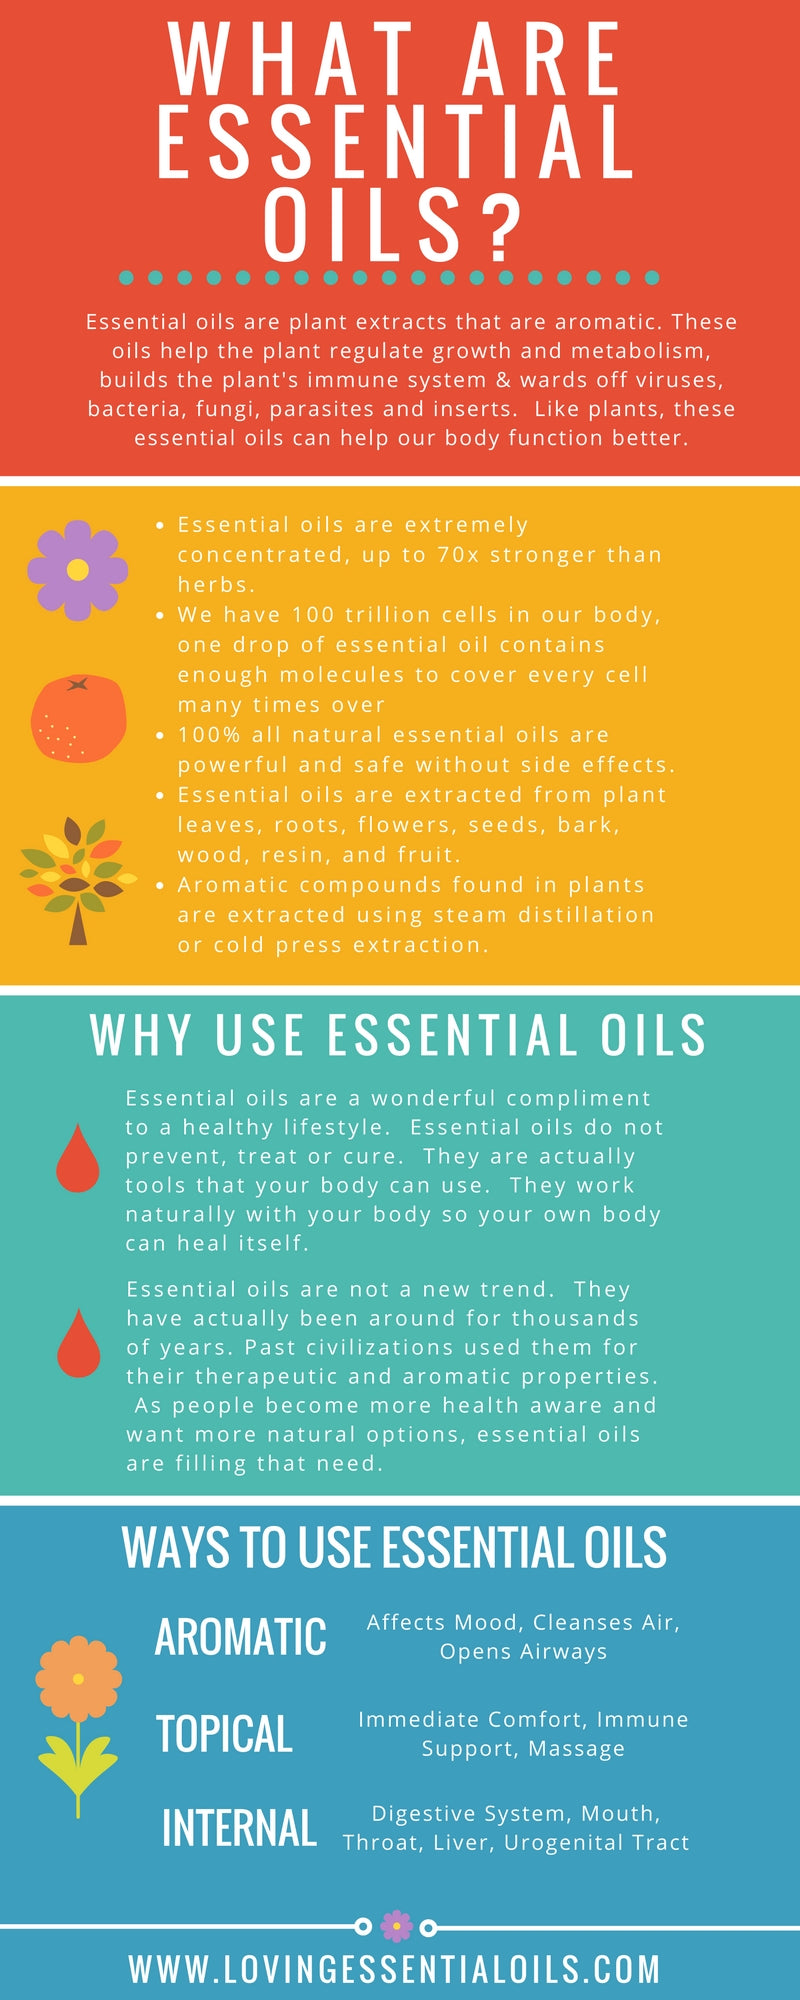 What Are Essential Oils and Why Use Them? – Loving Essential Oils